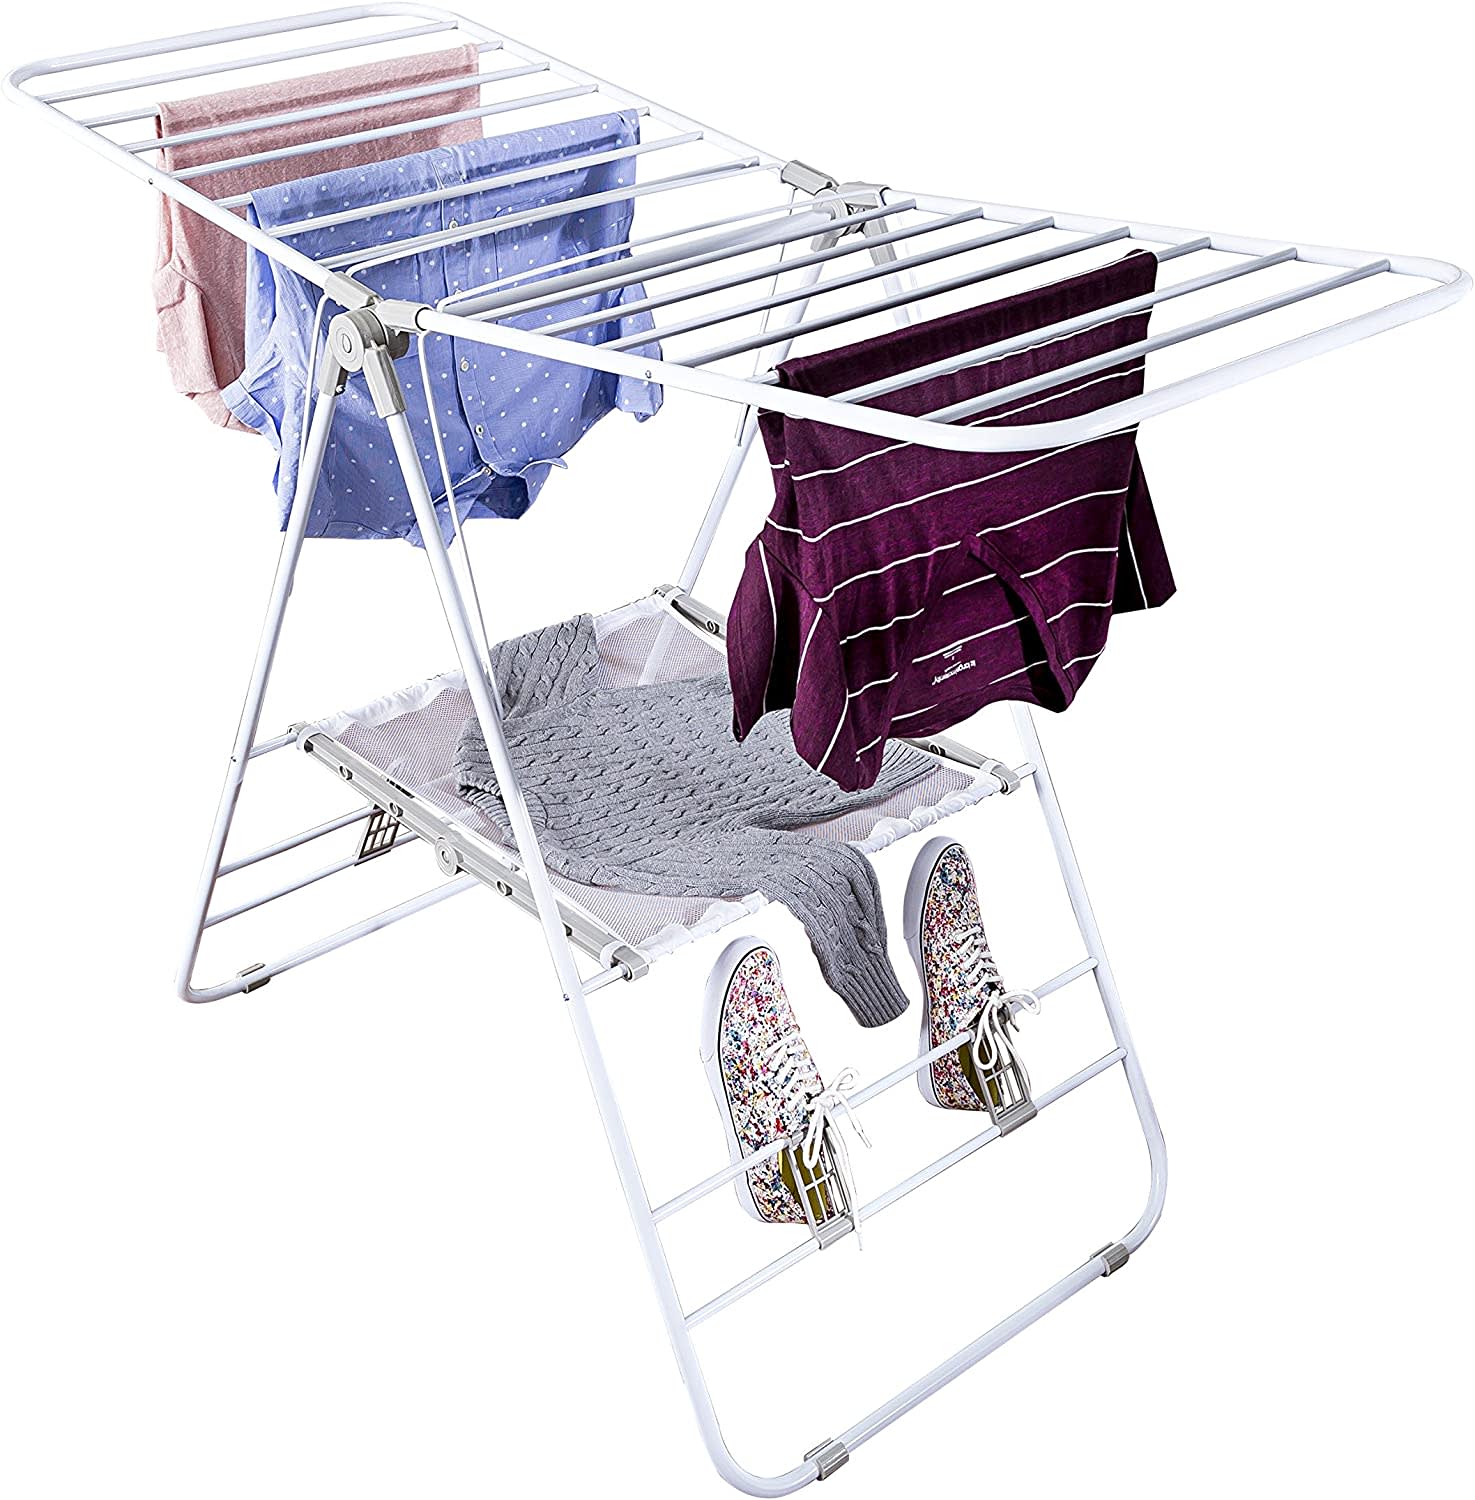 https://cdn.apartmenttherapy.info/image/upload/v1591208068/at/product%20listing/honey-can-do-gullwing-drying-rack-amazon.jpg